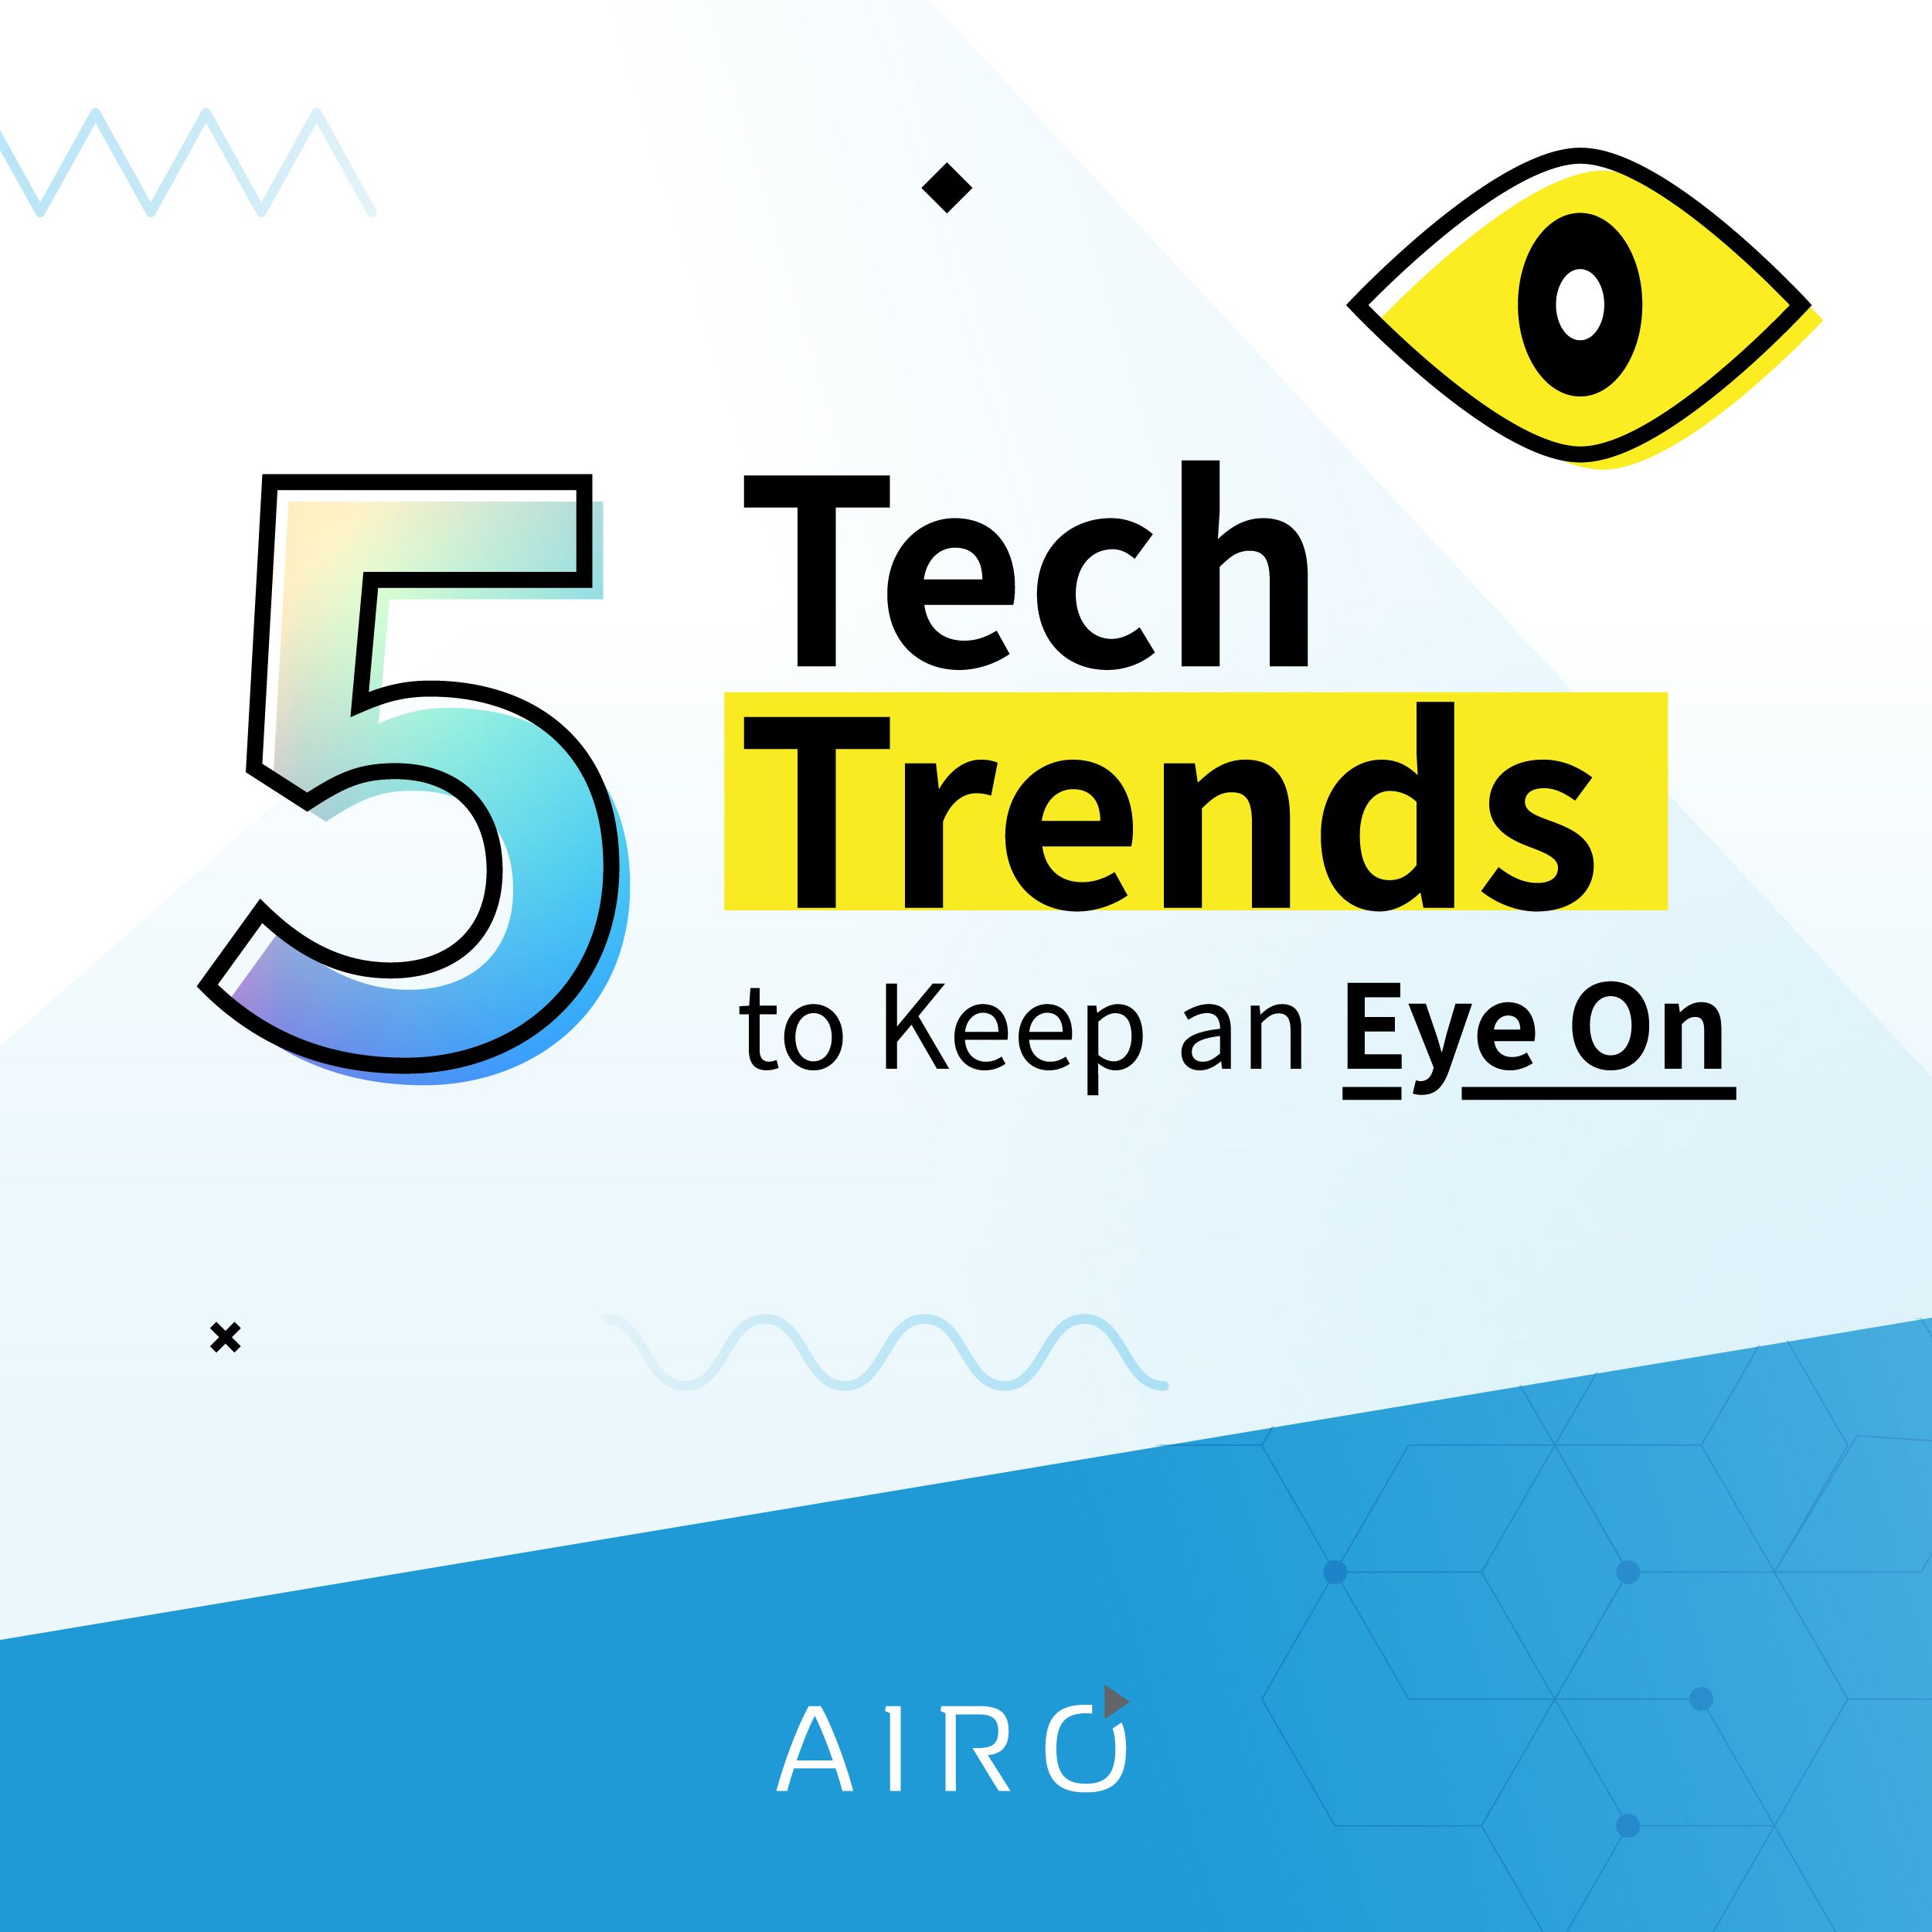 5 Tech Trends to Keep an Eye On